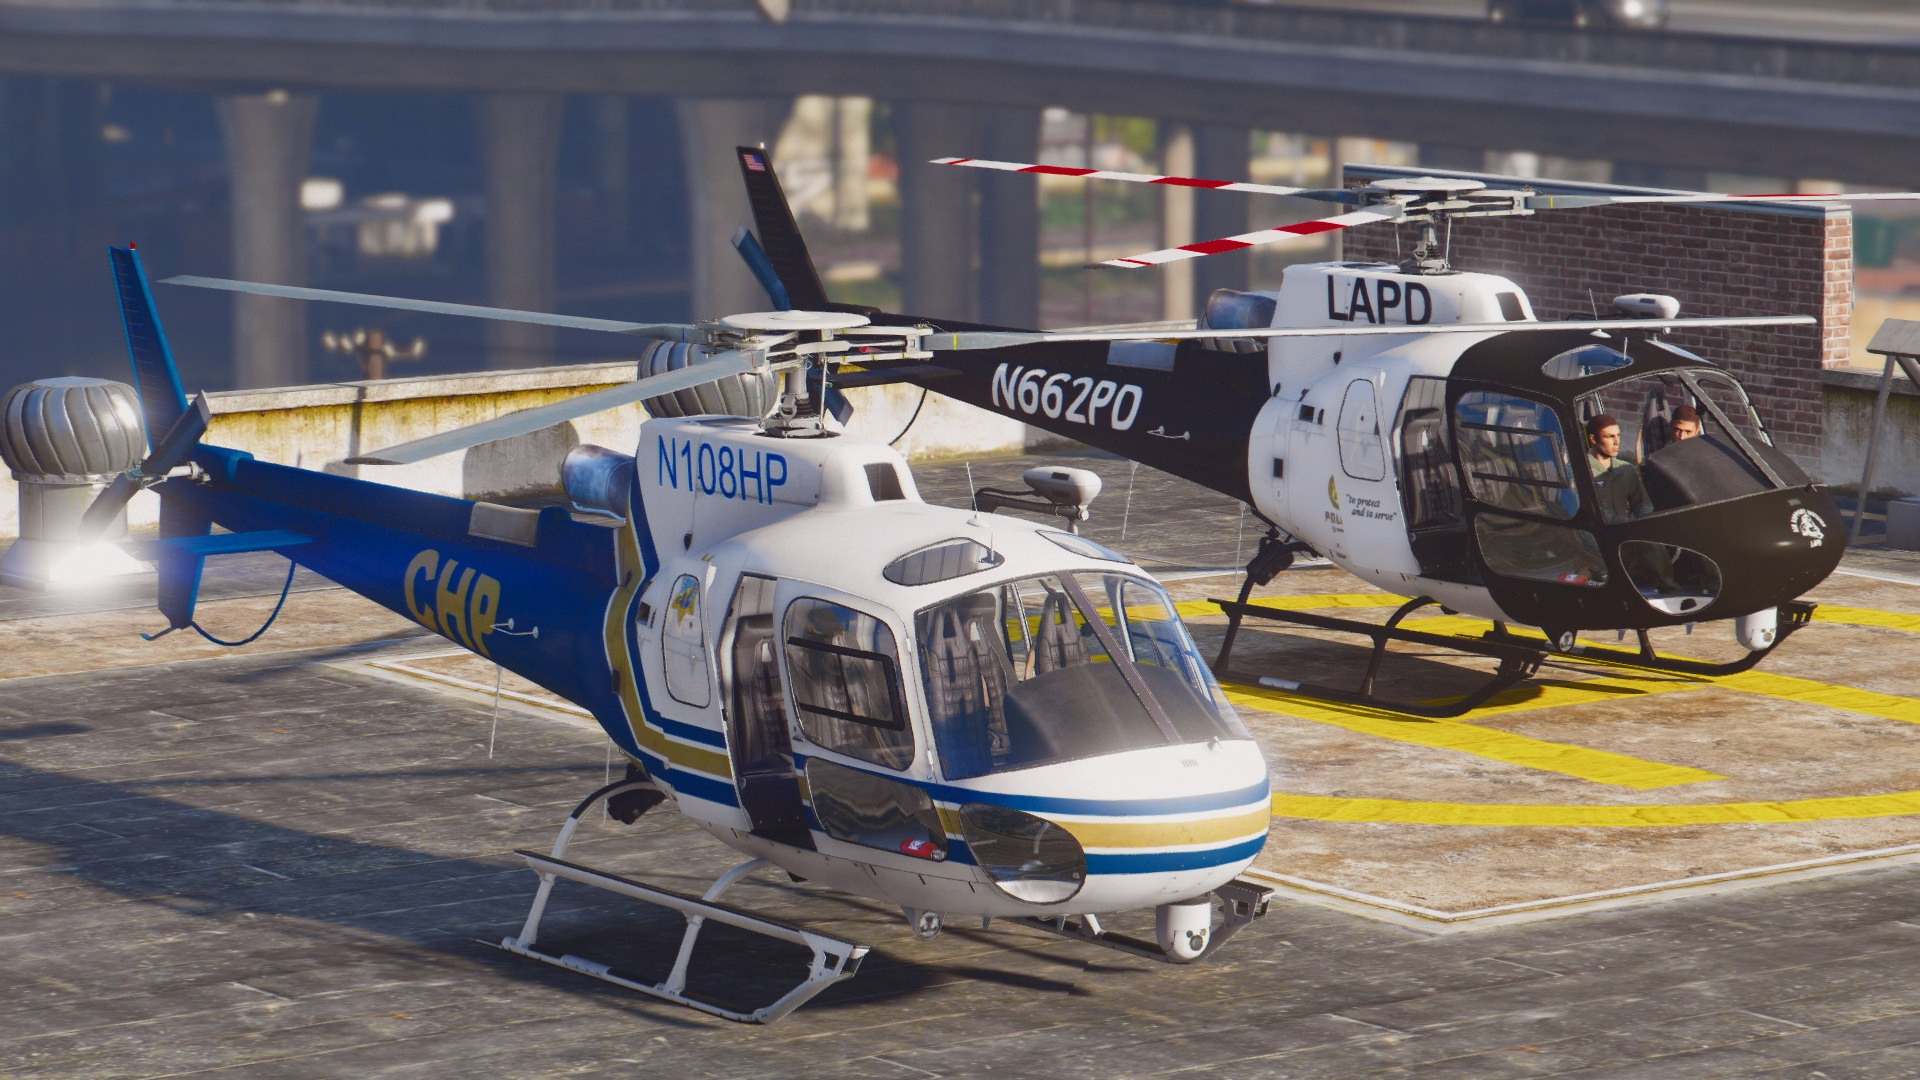 Gta 5 lapd helicopter (119) фото